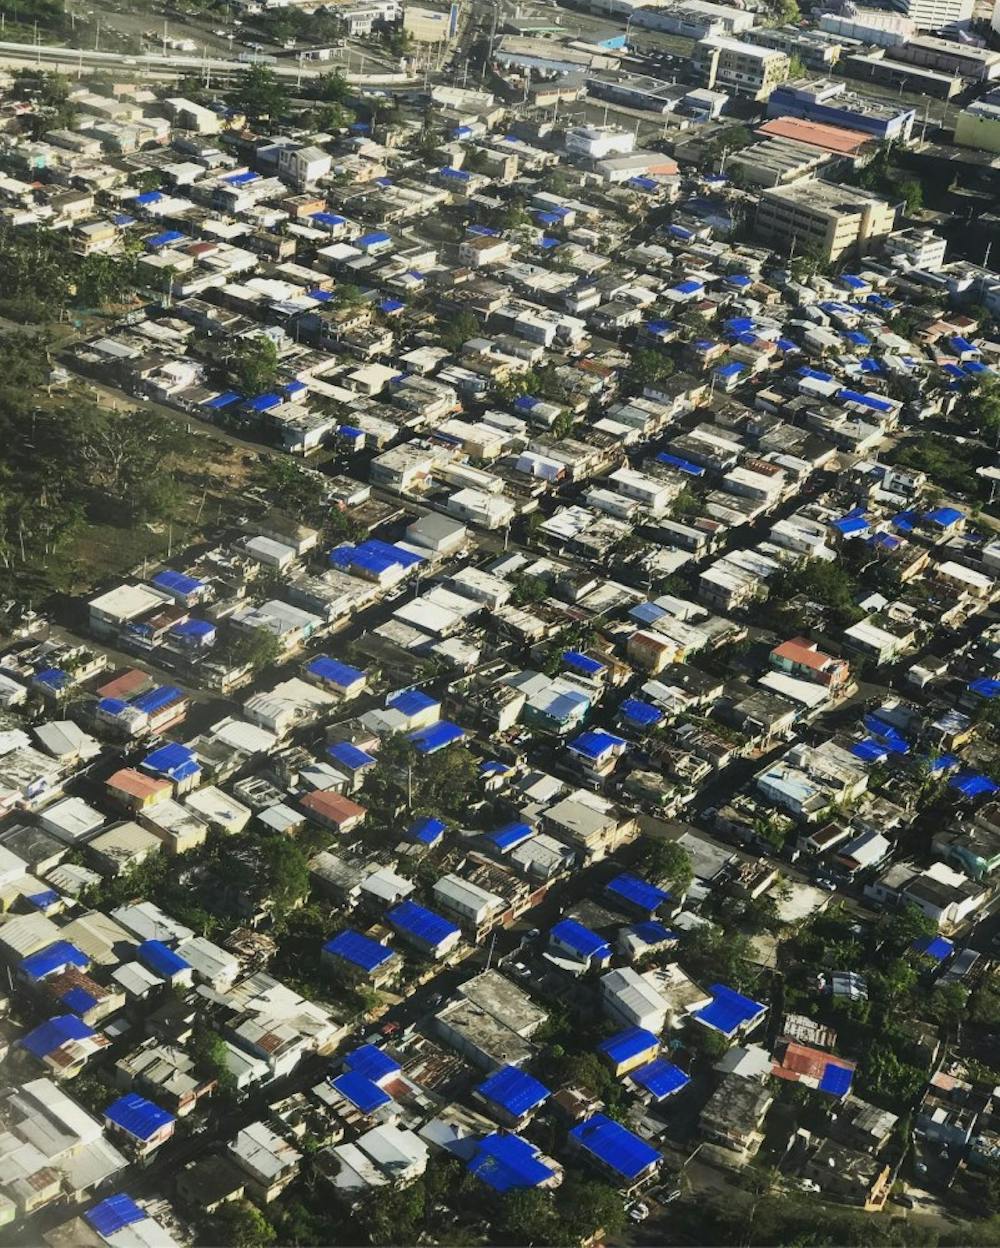 Thousands are still living in houses with provisional blue plastic tarps as roofs.